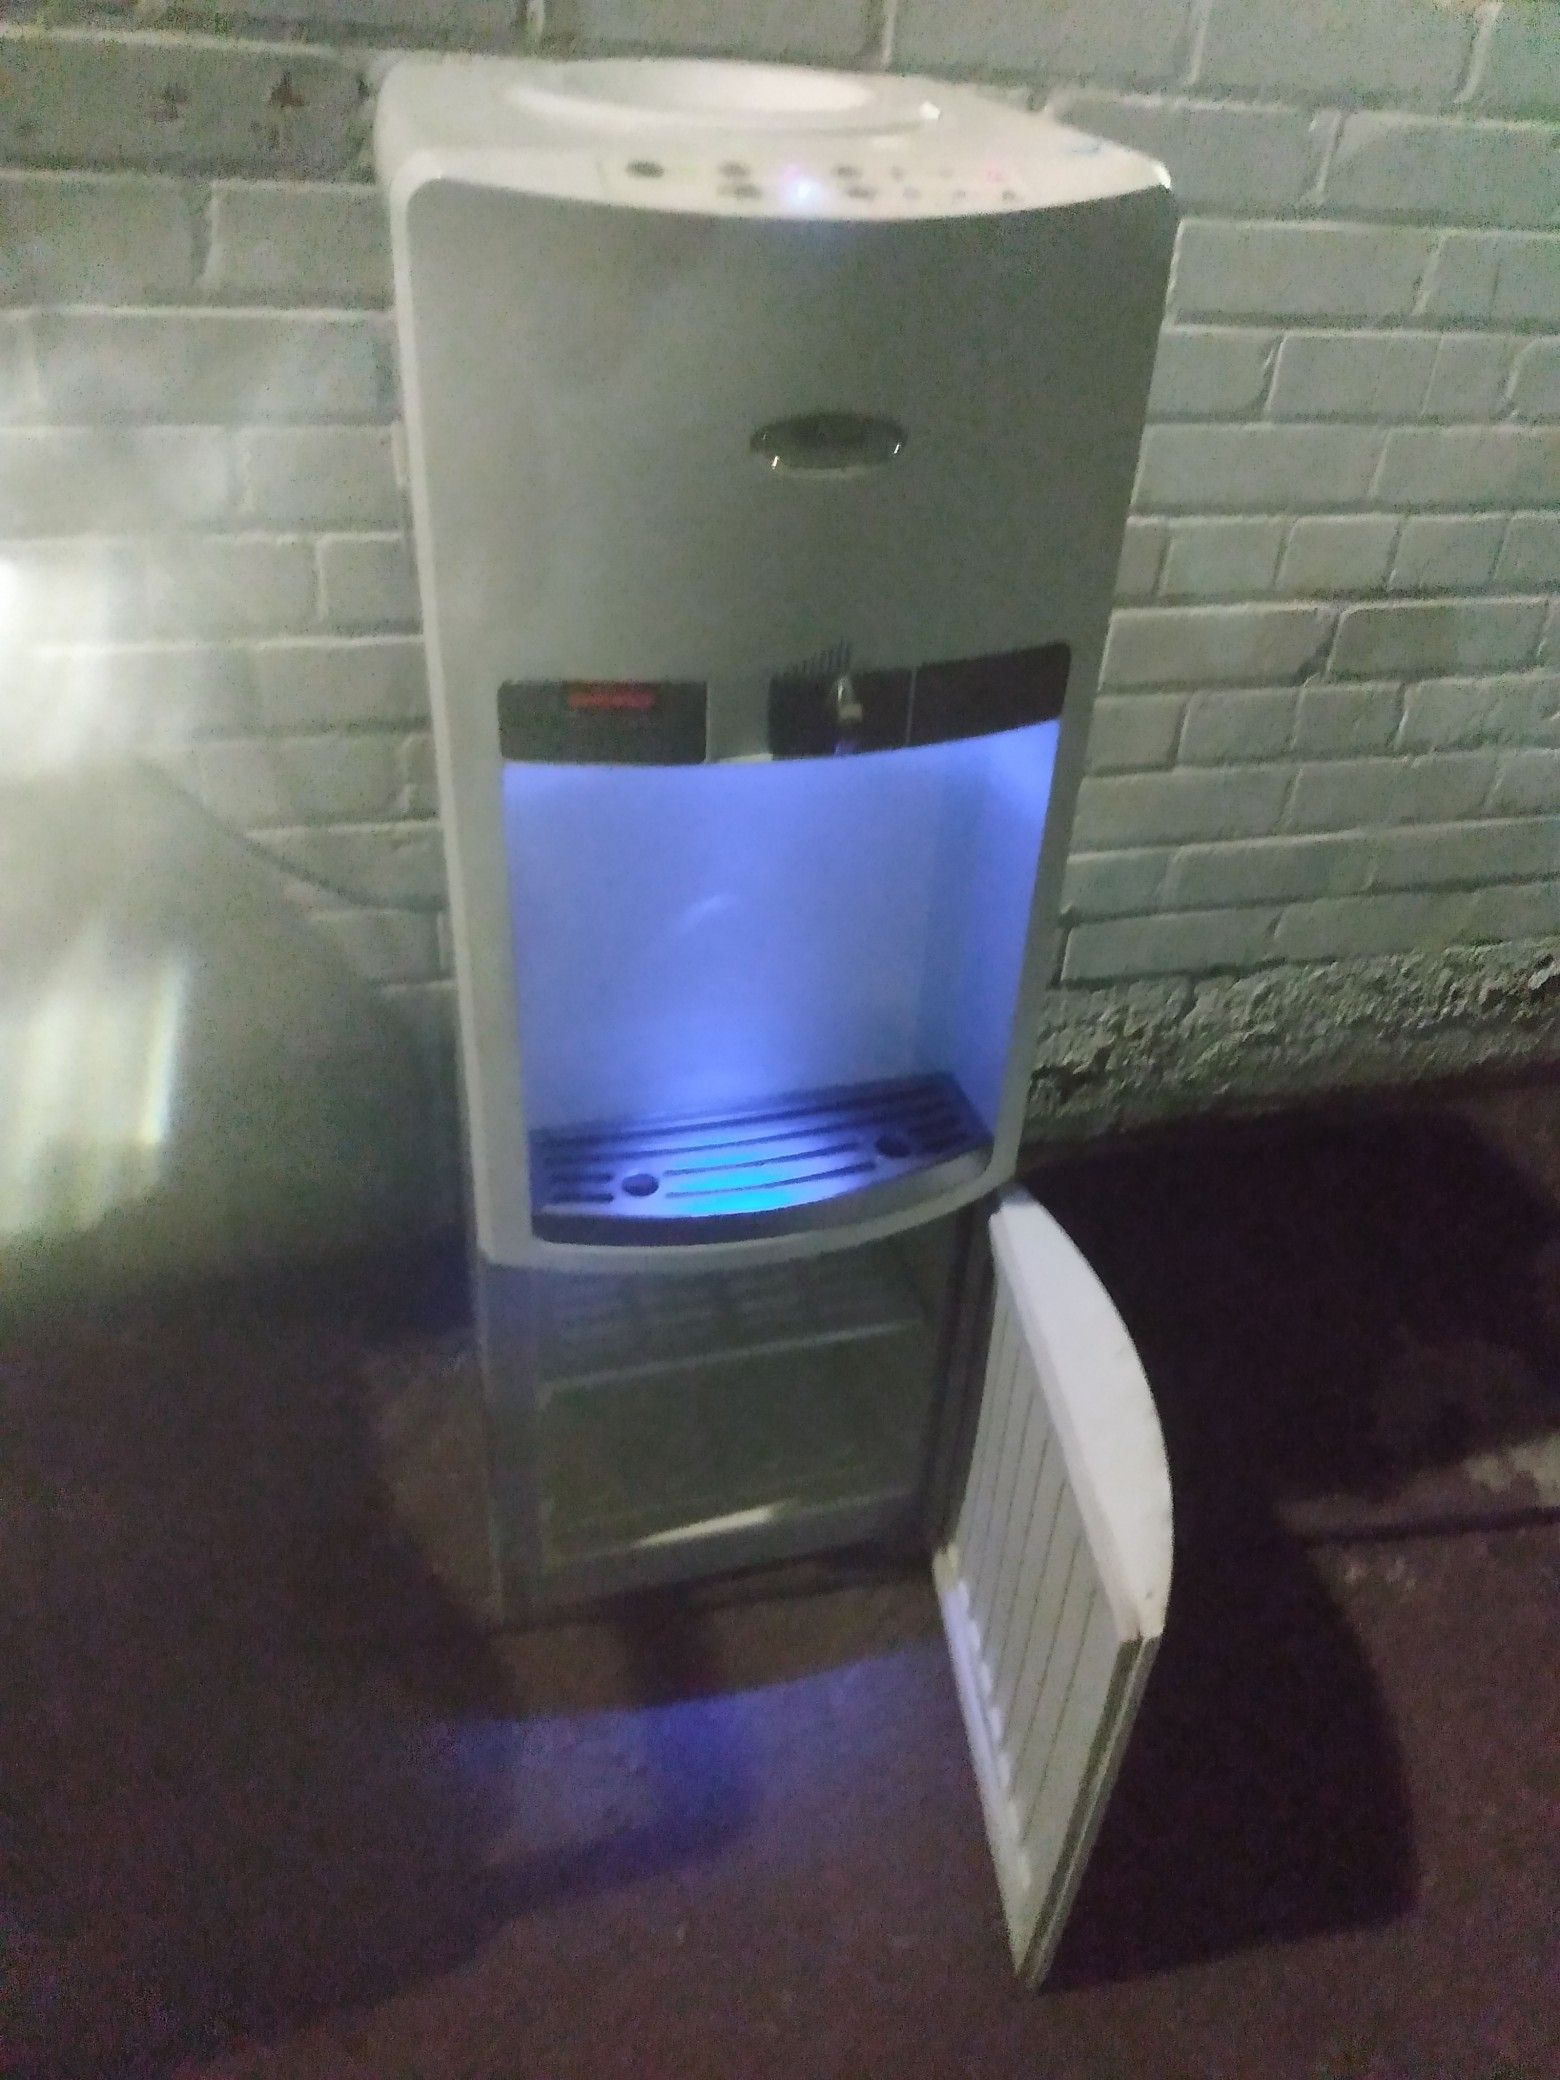 Whirlpool hot/cold water dispenser and rapid cool fridge.